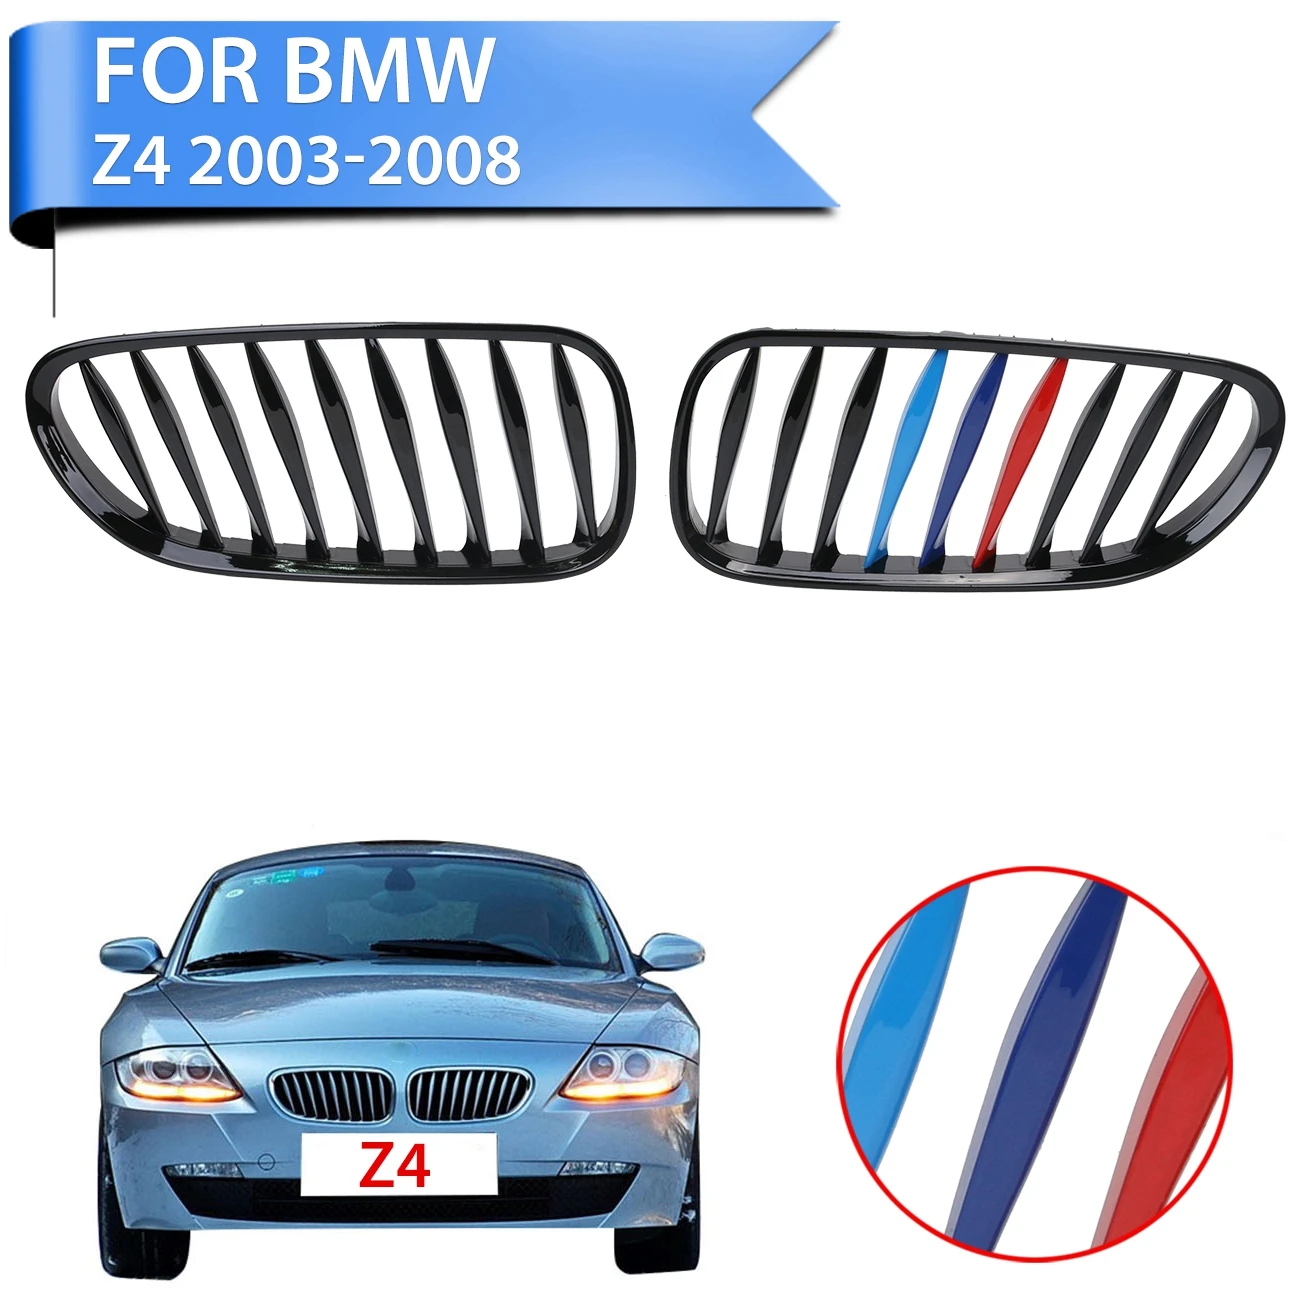 2X Grille Front Kidney Hood Grille For BMW Z4 E85 2003-2008 Carbon